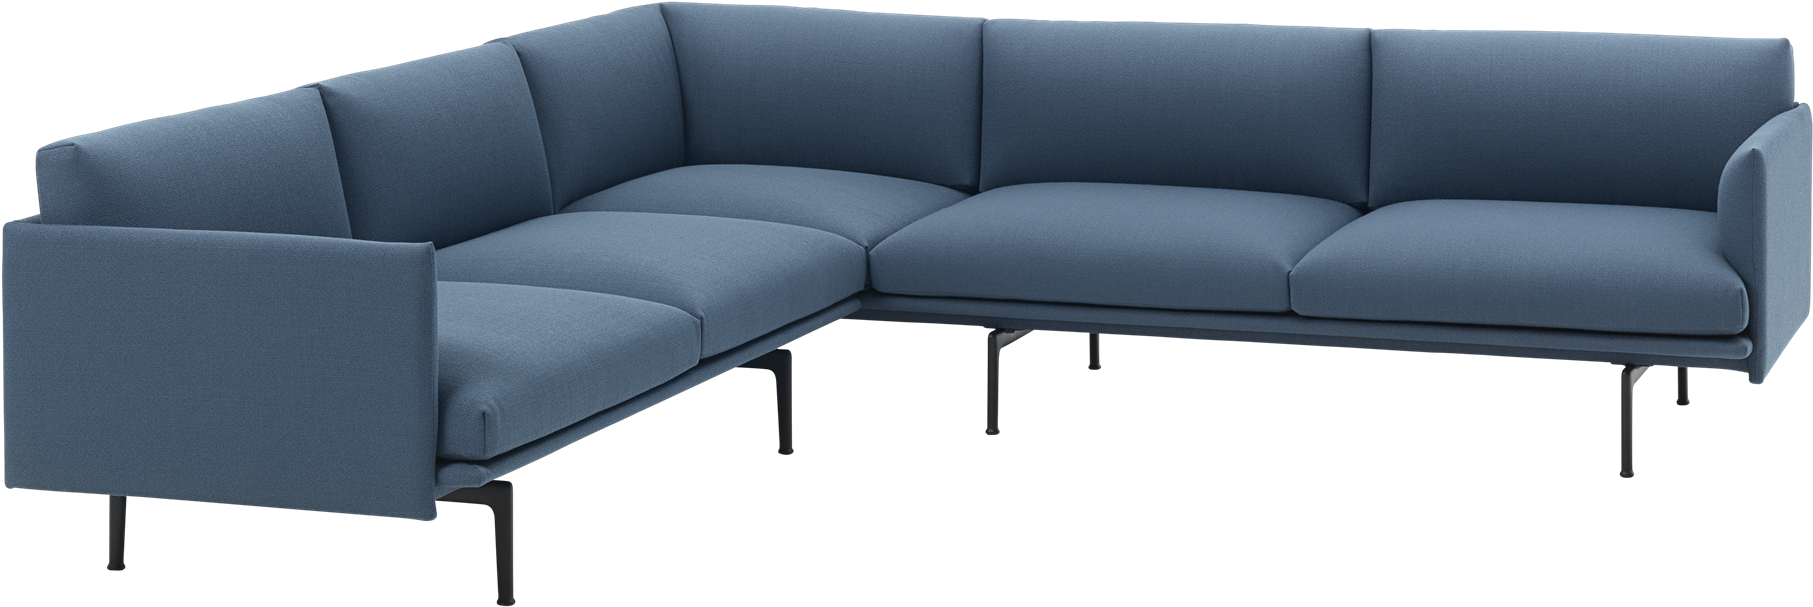 Modern Blue Sectional Sofa PNG